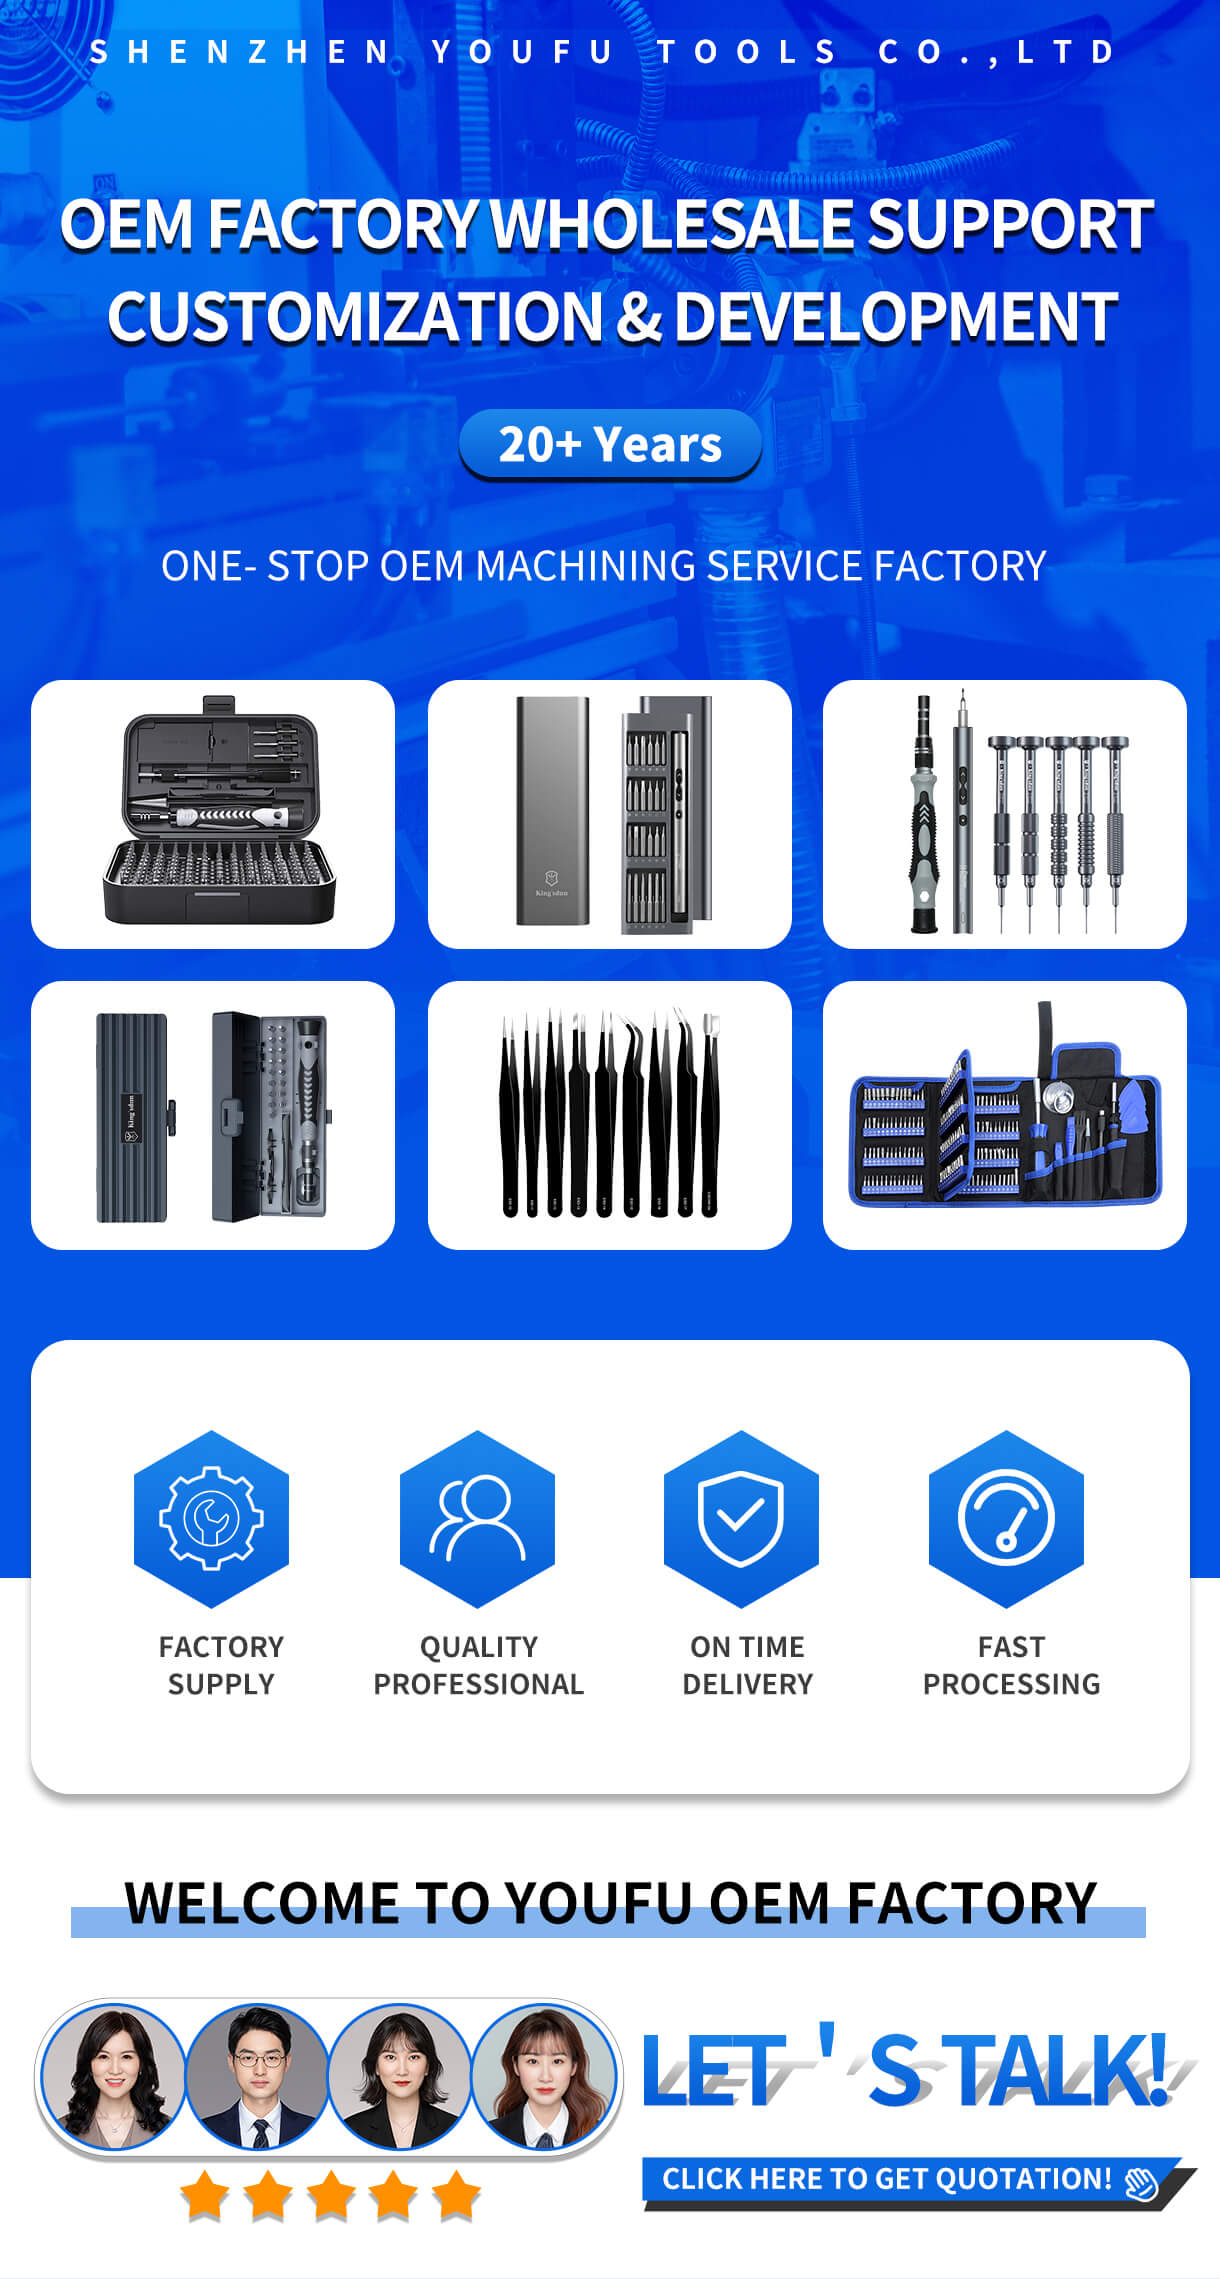 Kingsdun has been focusing on the field of screwdriver manufacturing for 12 years. We accept customized processing, high quality, and fast delivery. Welcome to consult. The Screwdriver sets are available in various sizes and are essential for home use. They are very suitable for the maintenance needs of household electronic products, furniture, automobiles, motorcycles, bicycles and other household products.